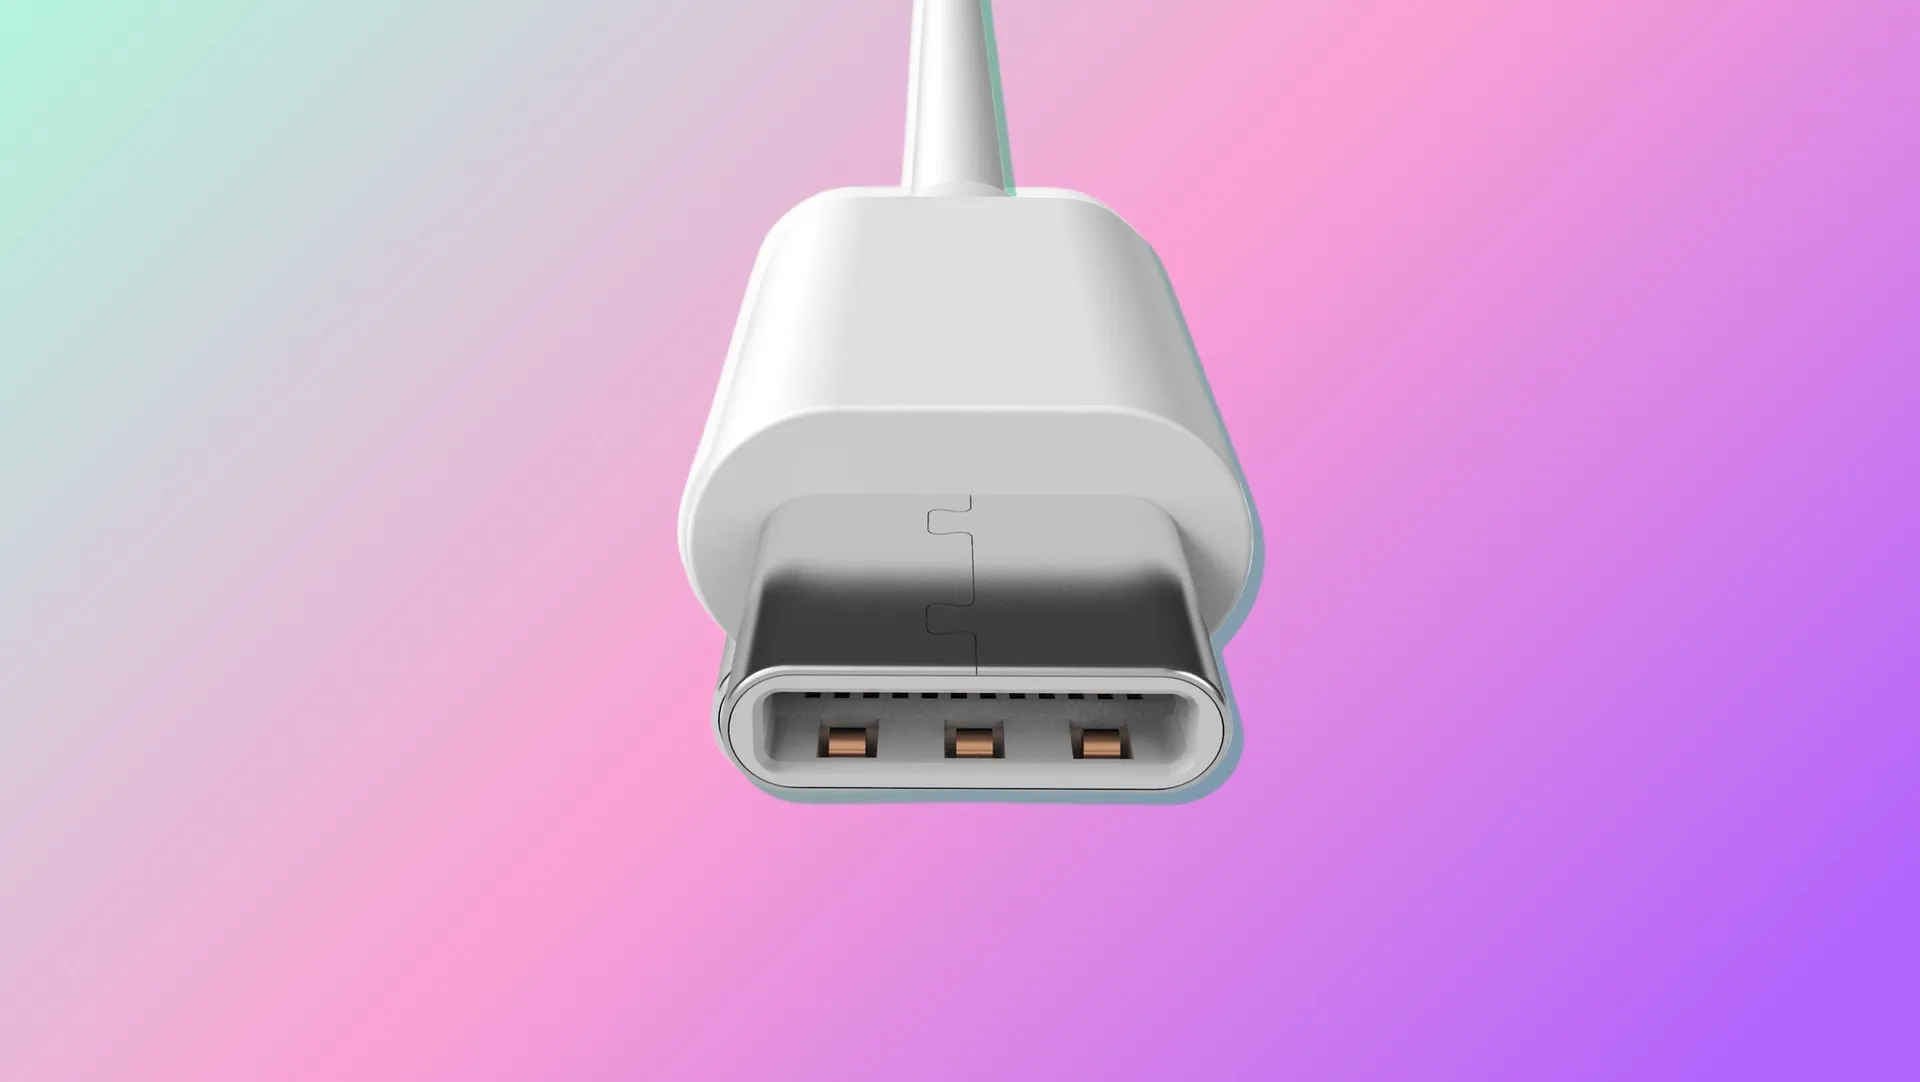 Has the EU Finally Made the U in USB-C Actually Stand for Universal?